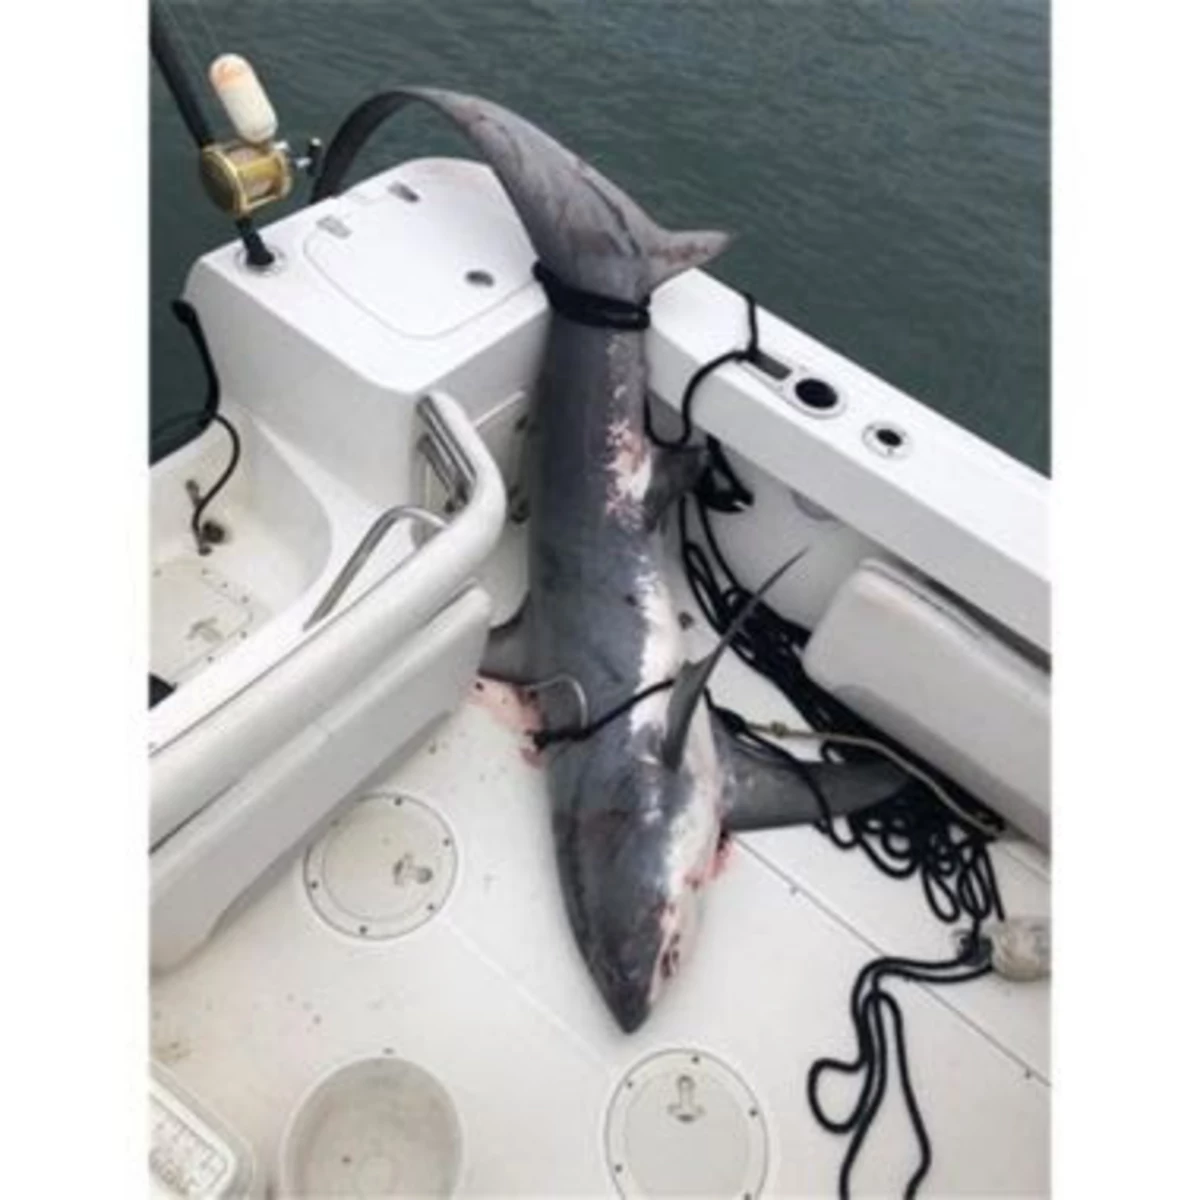 New York Fisher May Face 'Federal Violations' For Catching Shark